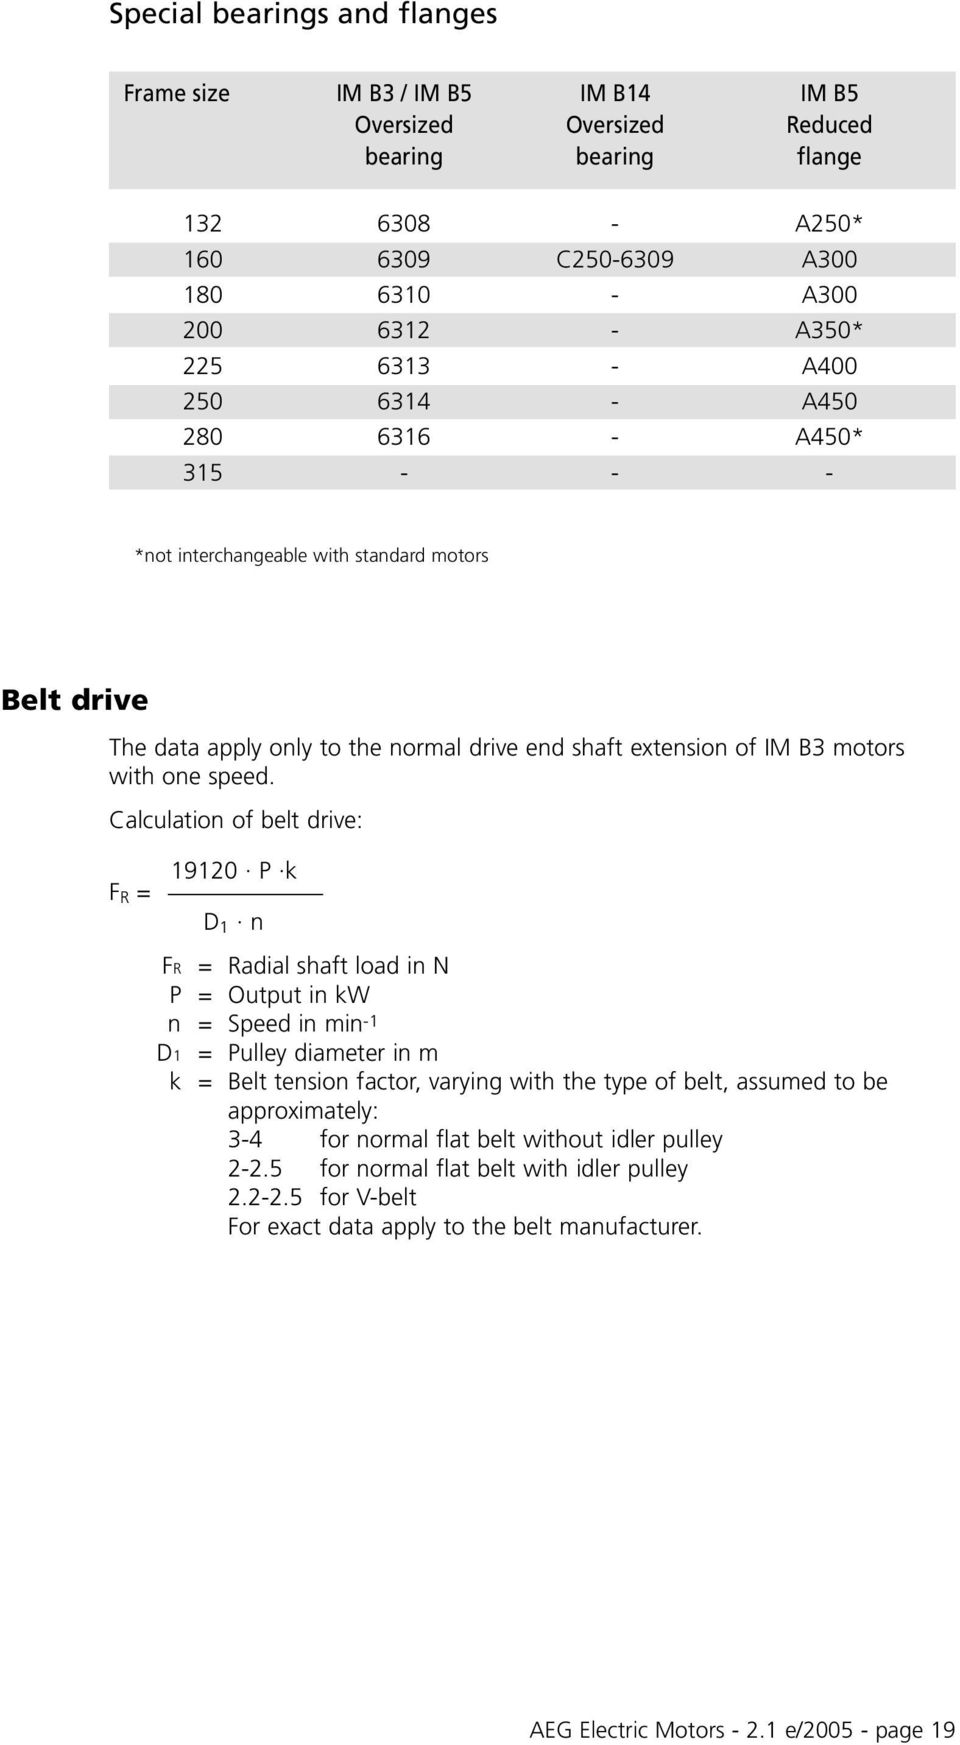 Calculation of belt drive: F R = 19120 P k D 1 n = Radial shaft load in N P = Output in kw n = Speed in min -1 = Pulley diameter in m k = Belt tension factor, varying with the type of belt, assumed